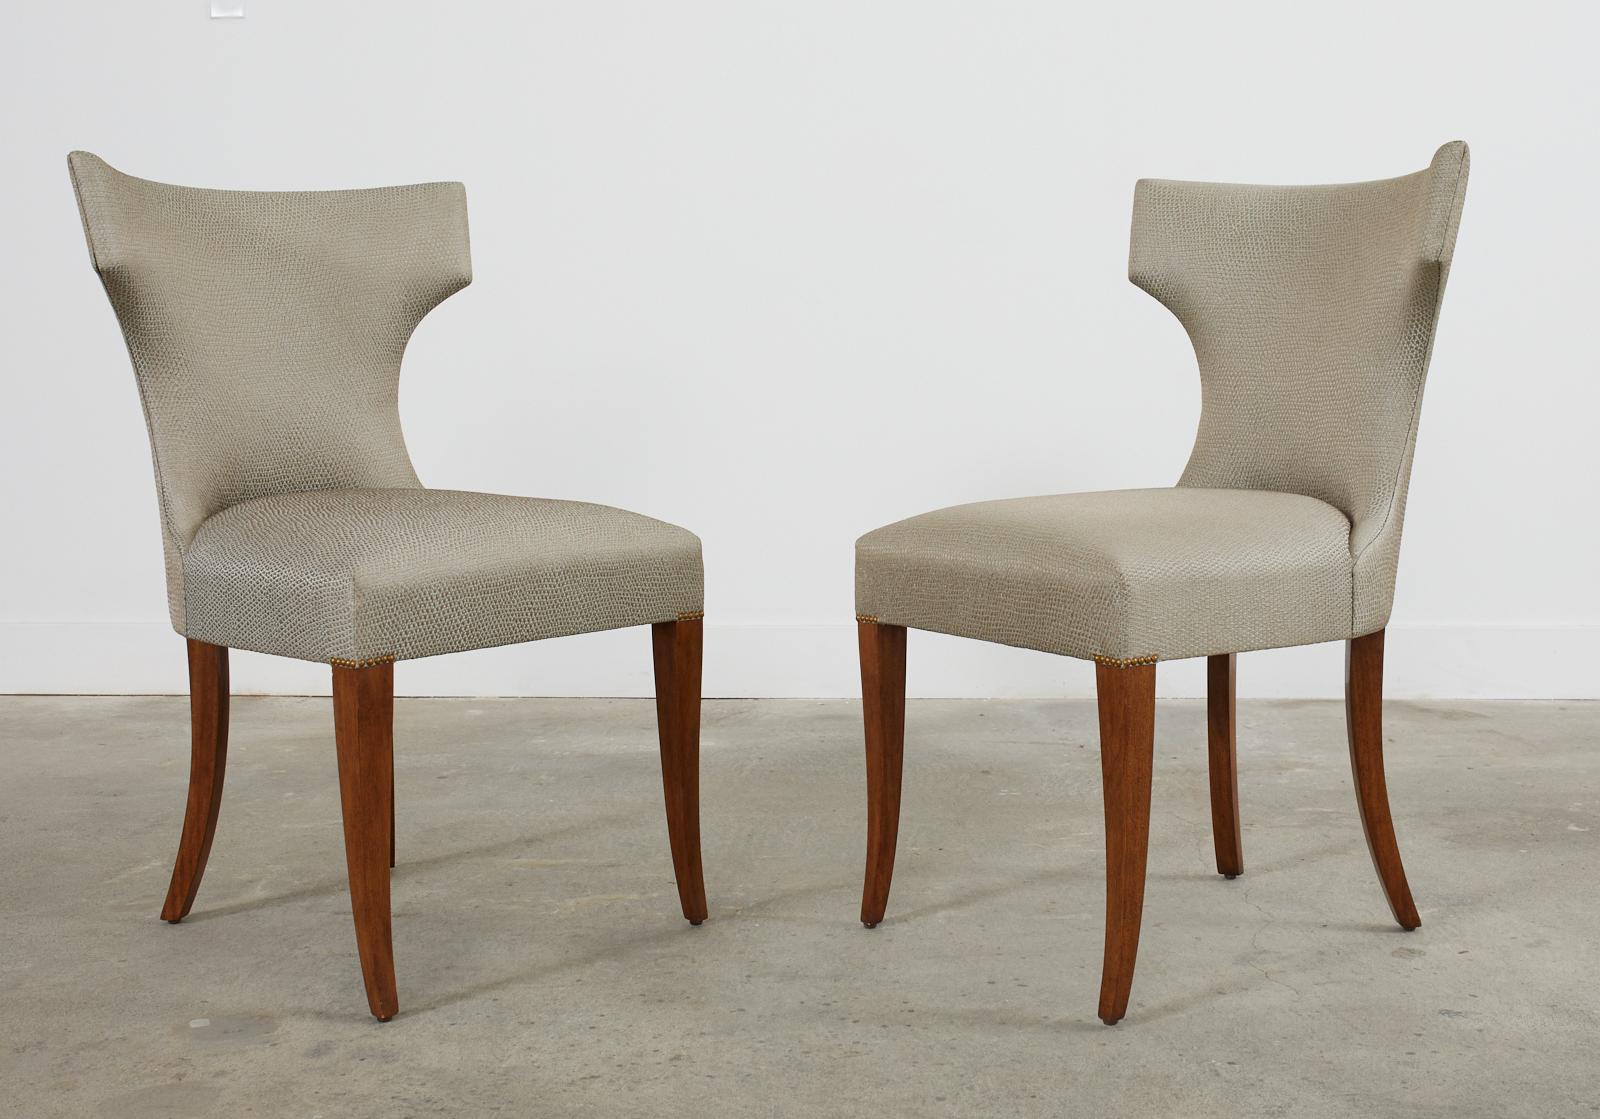 Set of Four Kerry Joyce for Dessin Fournir Luxford Dining Chairs In Good Condition For Sale In Rio Vista, CA